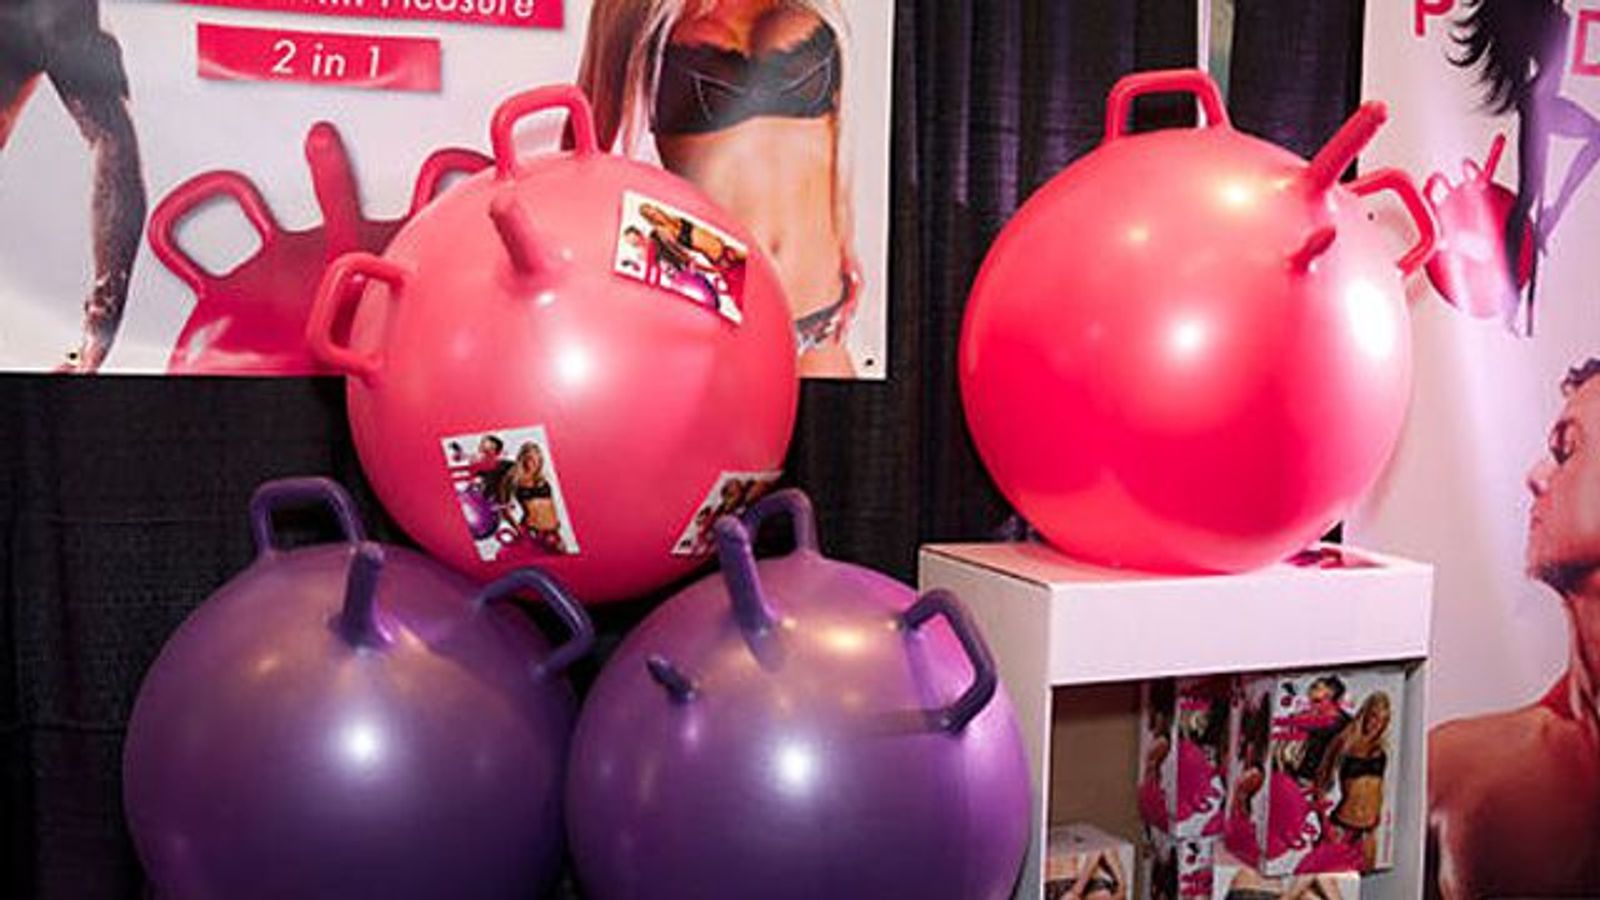 Tosh.O Host Can Get Excited: SFW Video For Pink Diamond69's Magic Ball In Works